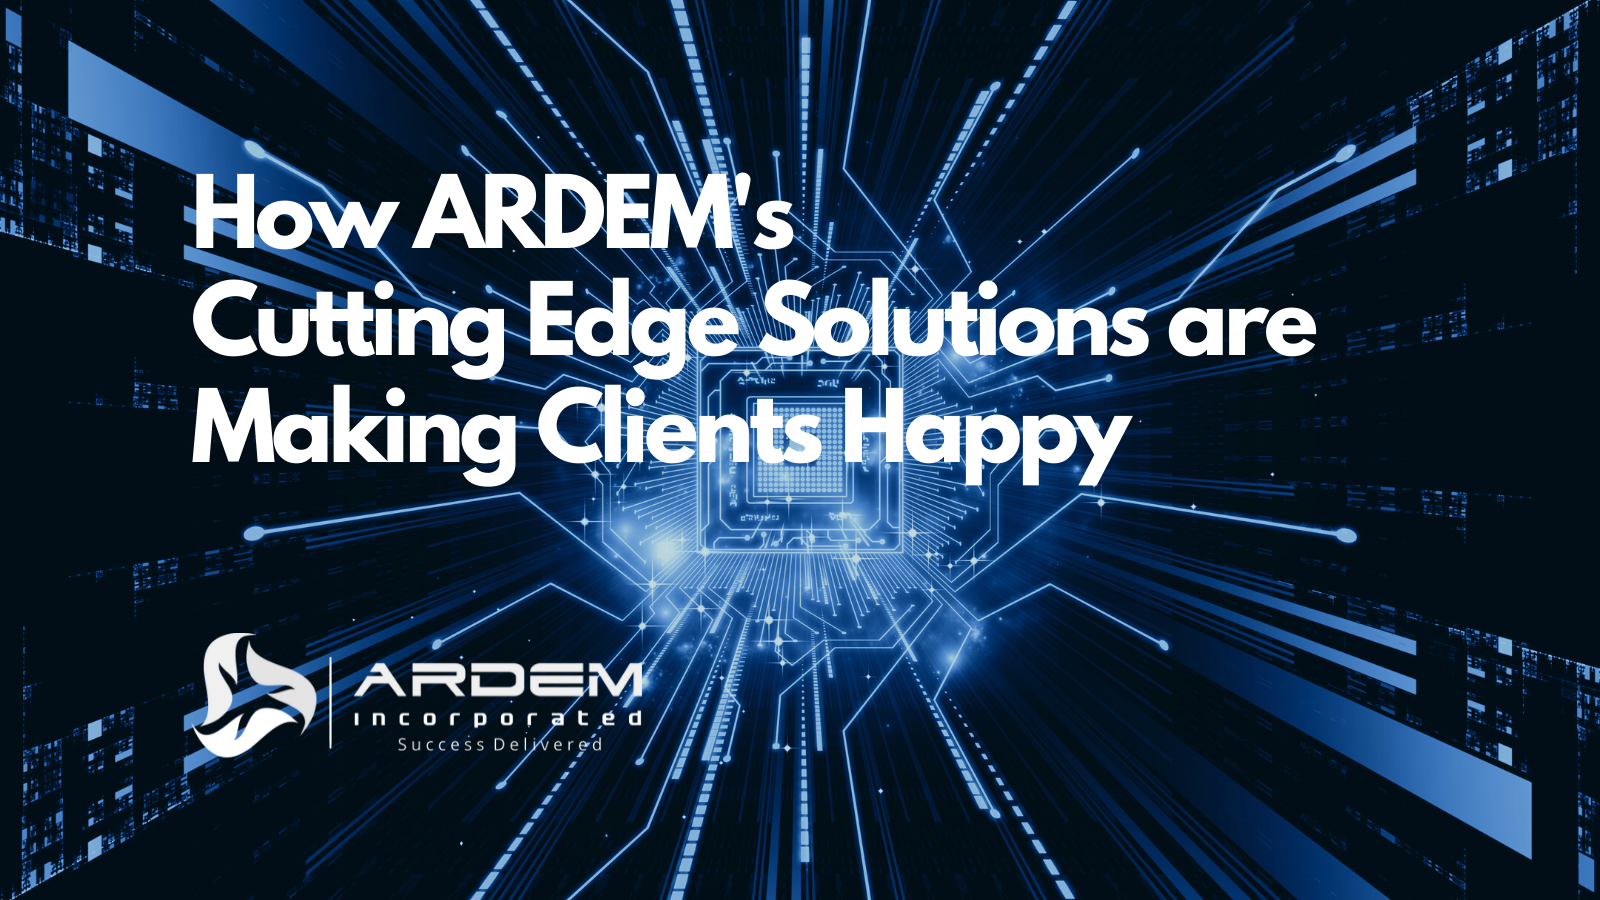 ARDEM Cutting Edge Solutions Making Clients Happy